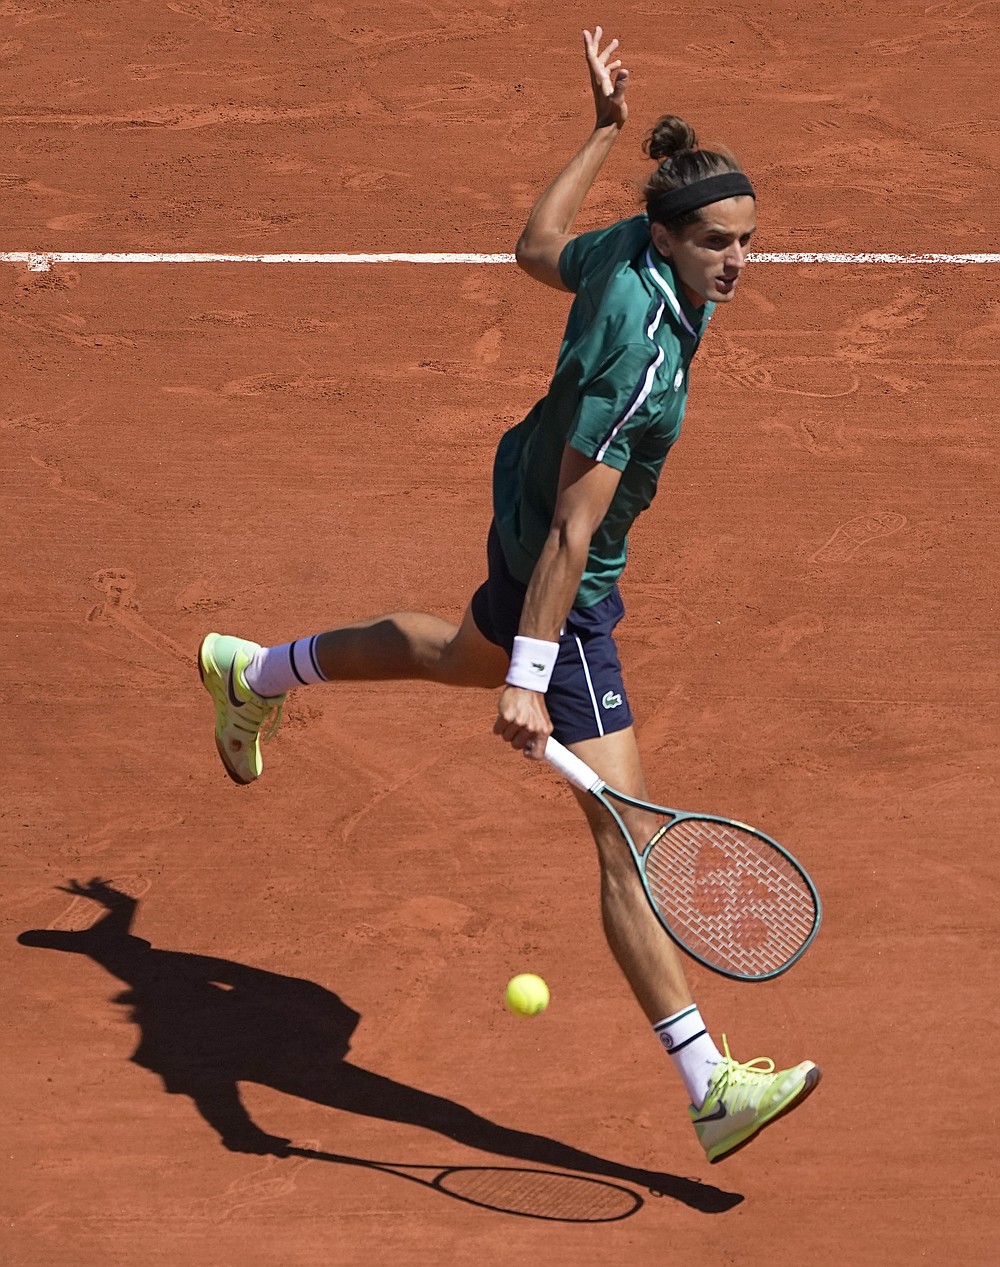 Pierre-Hugues Herbert of France plays a return to Italy's Jannik Sinner during their first round match on day two of the French Open tennis tournament at Roland Garros in Paris, France, Monday, May 31, 2021. (AP Photo/Michel Euler)